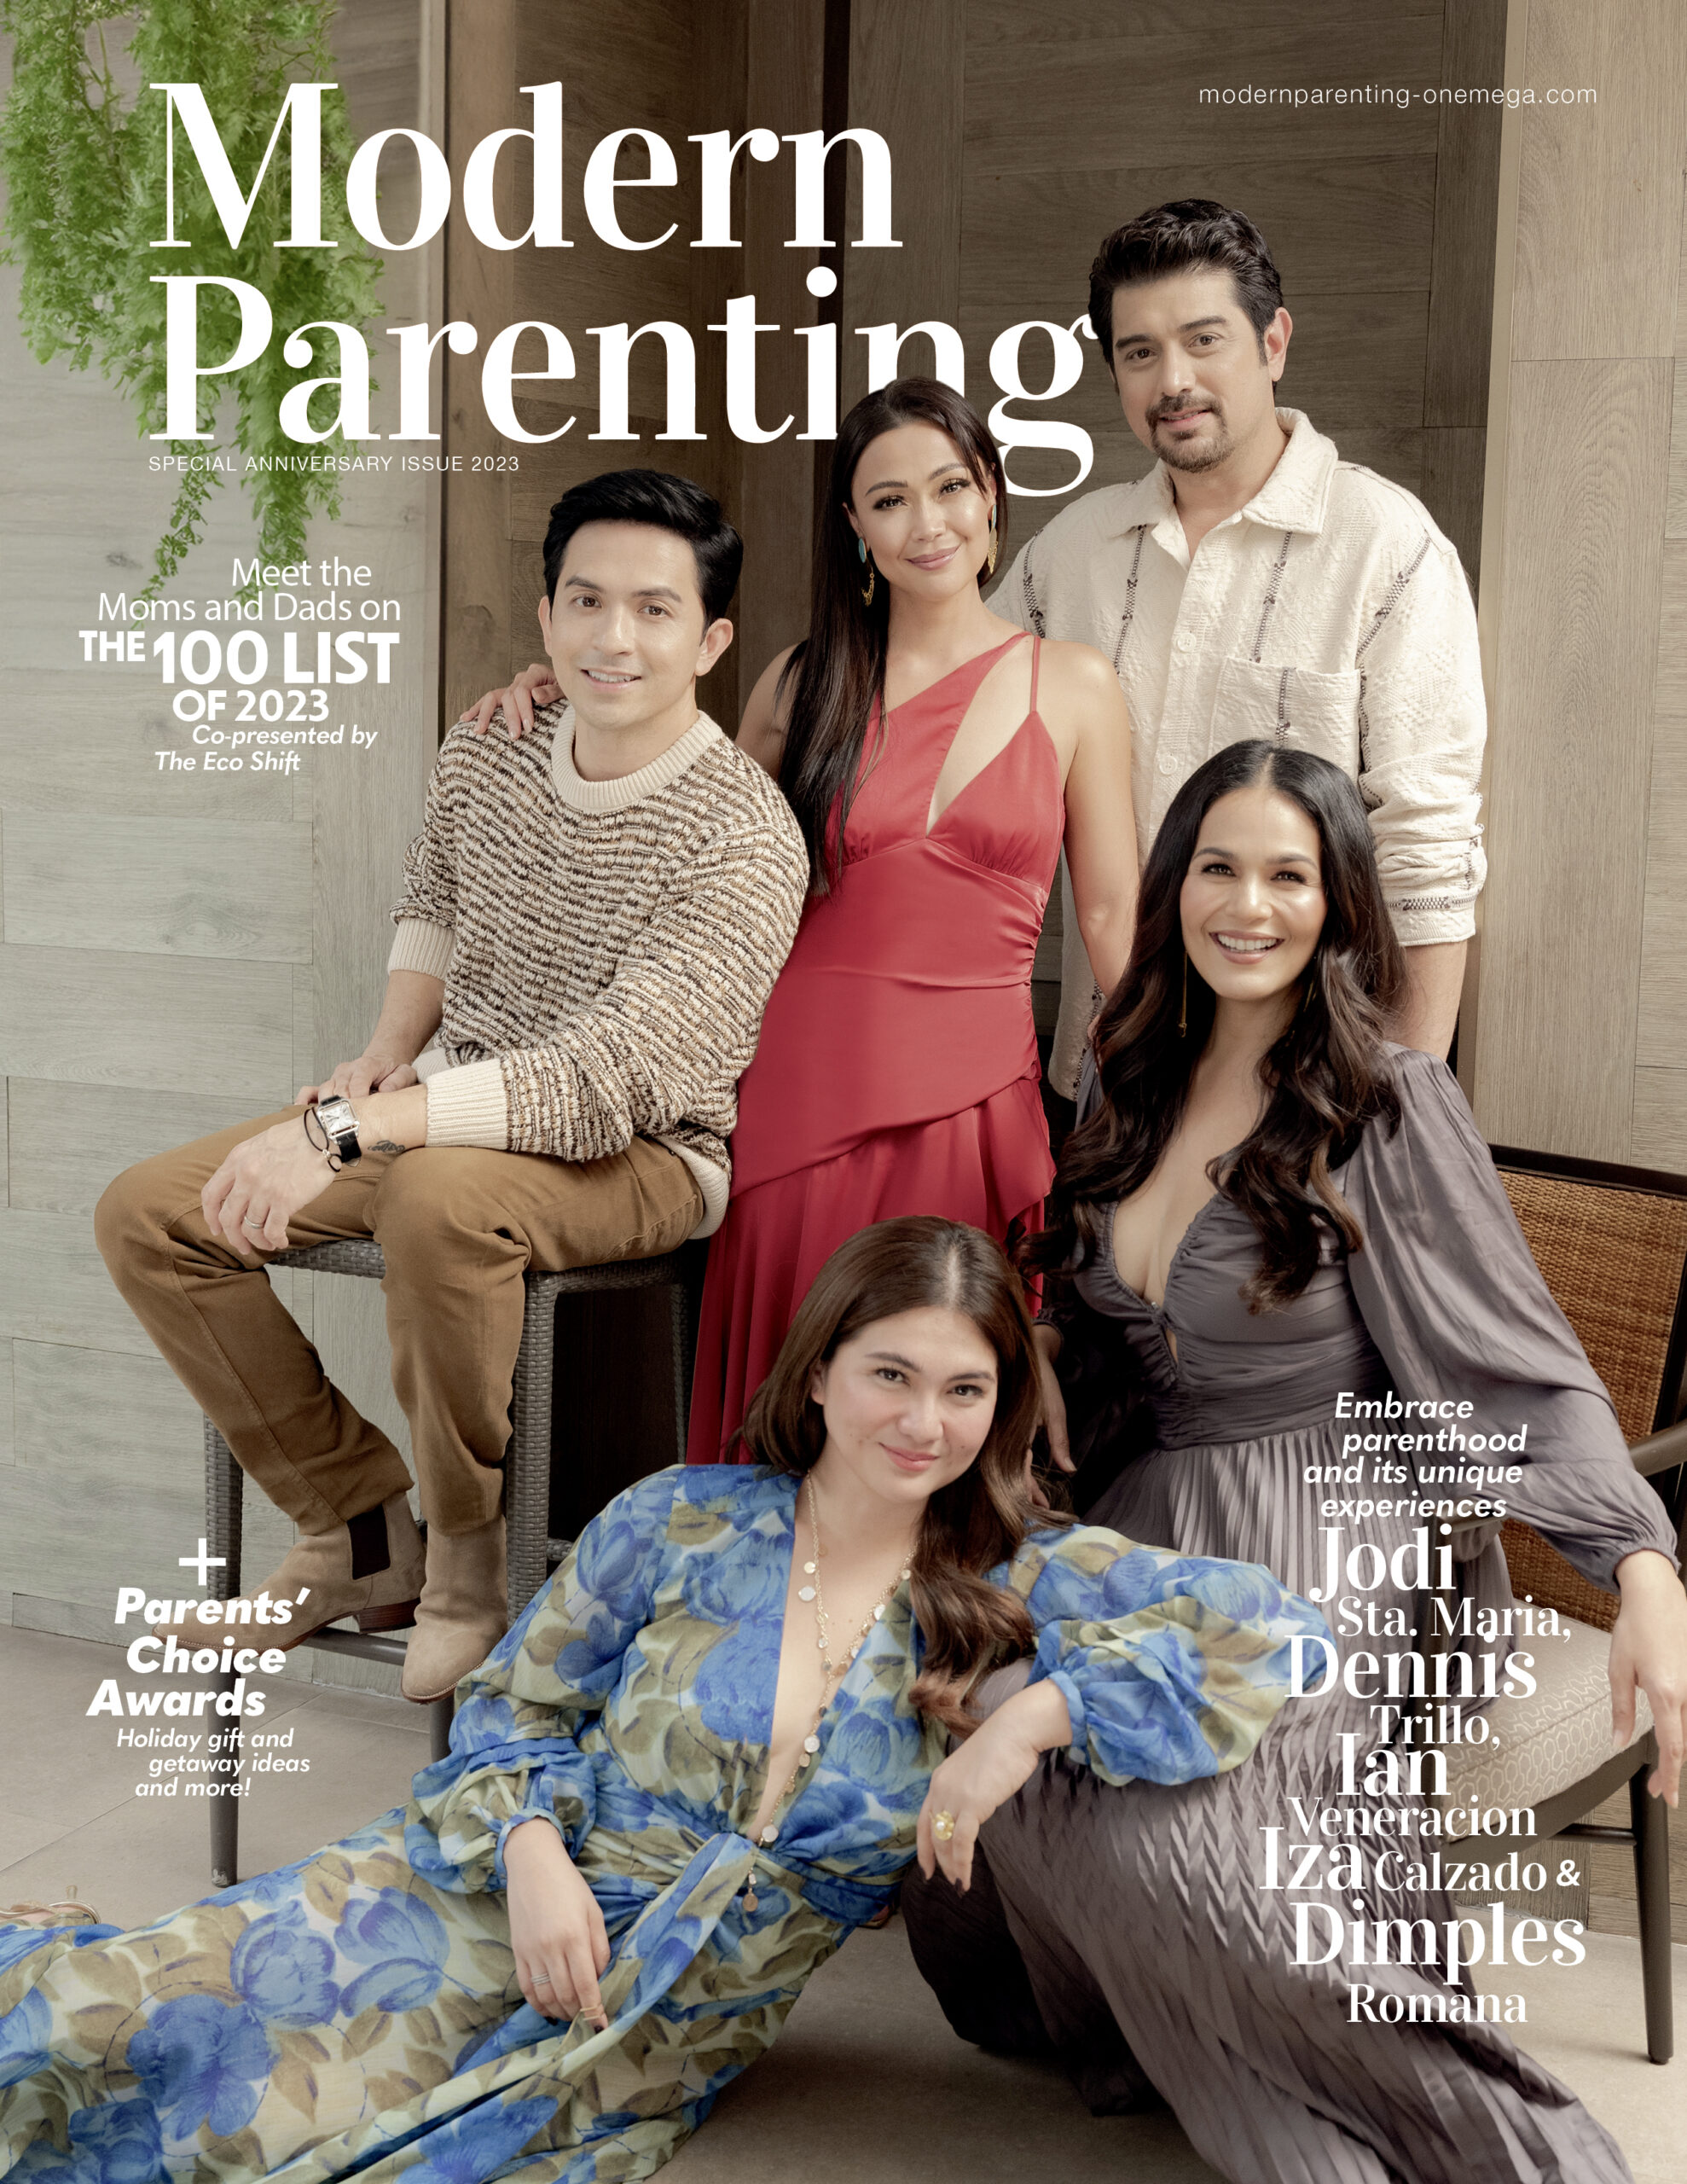 Jodi, Dennis, Ian, Iza, and Dimples: The Role of a Lifetime